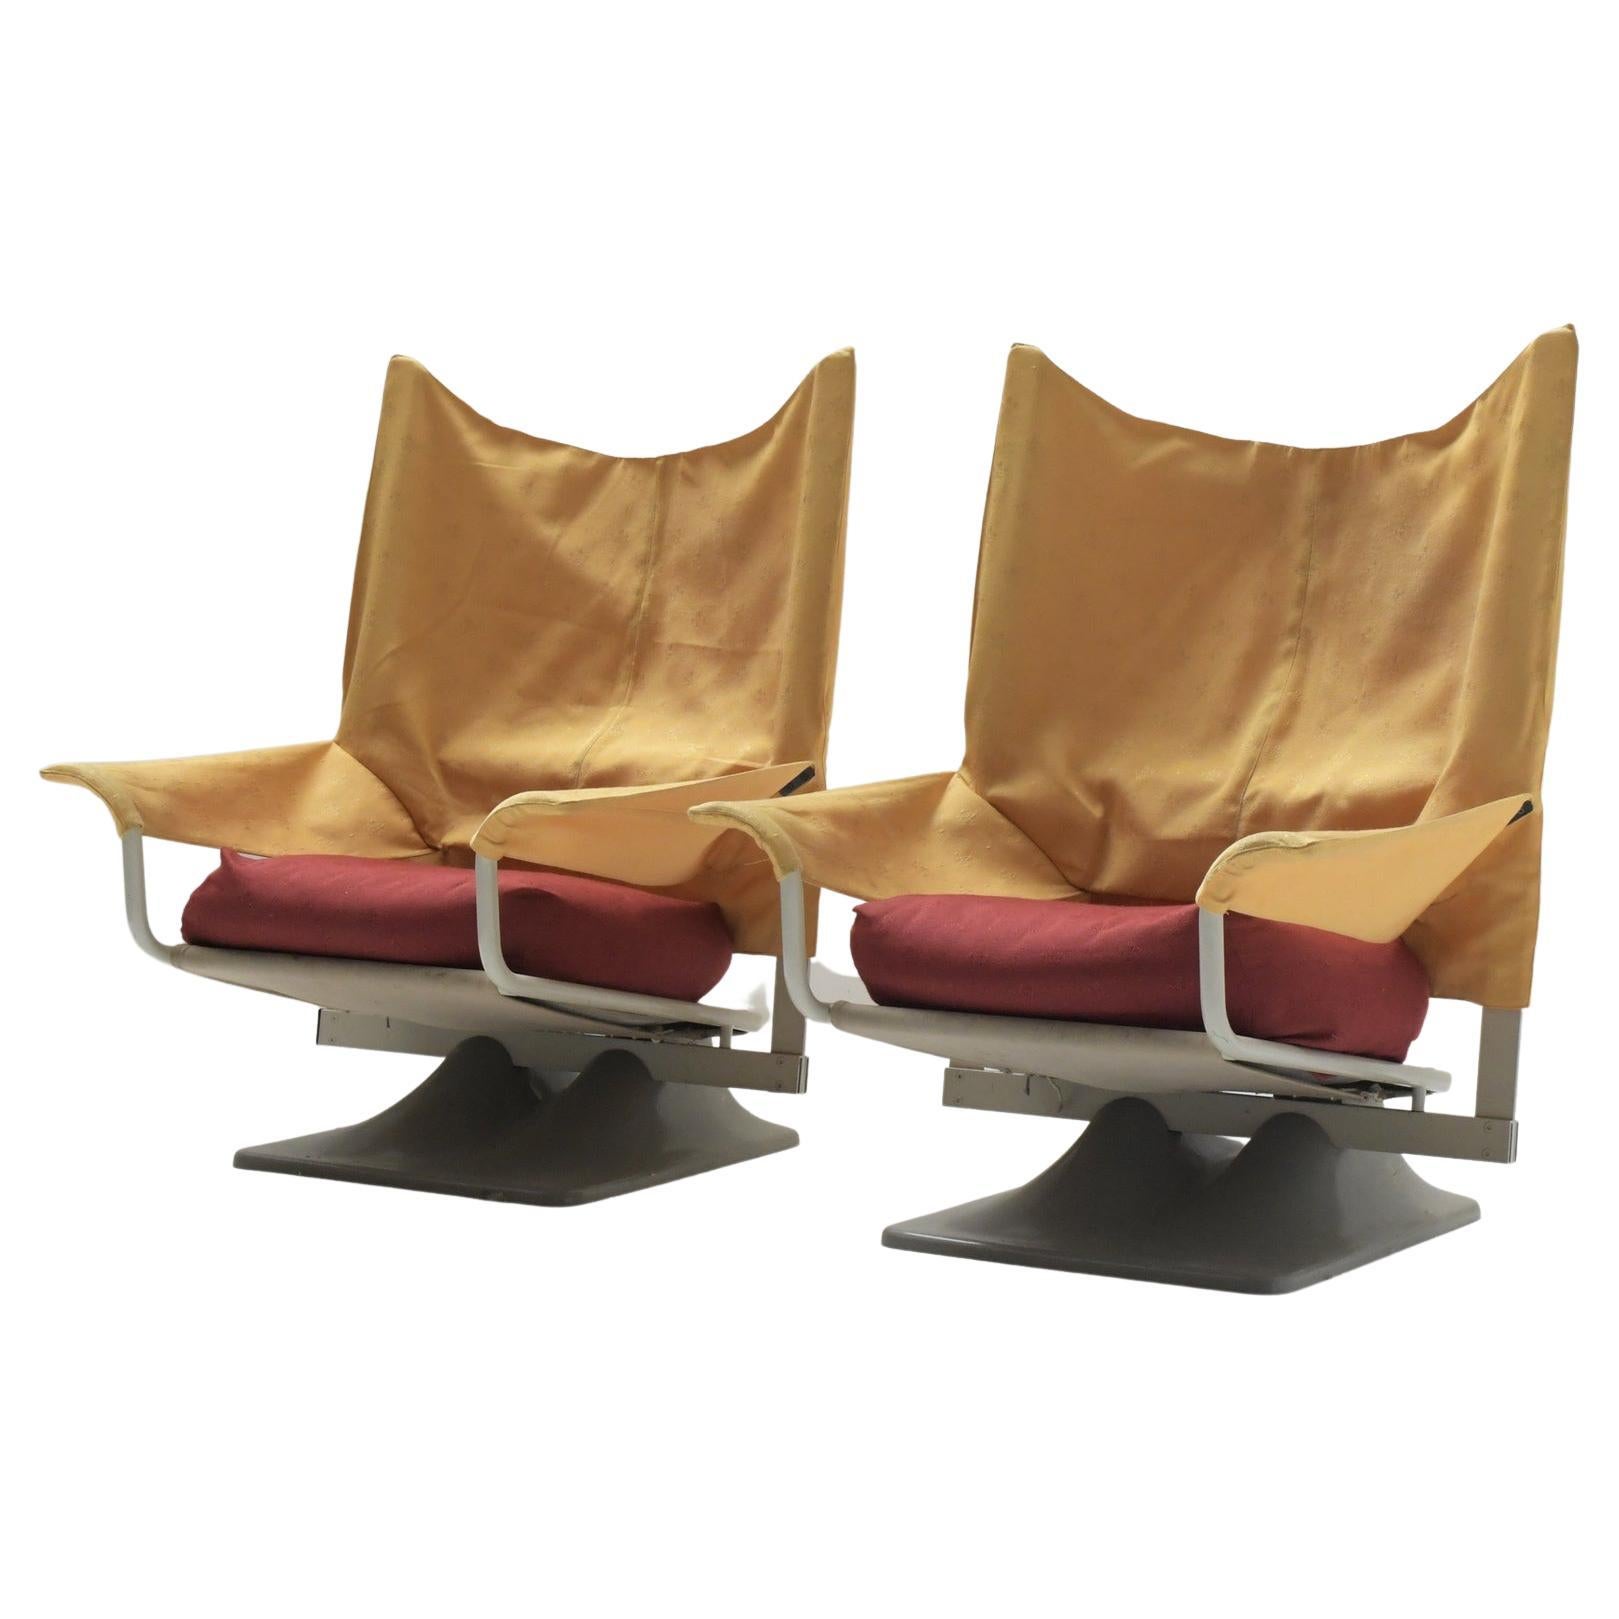 Aeo Matching Lounge Chairs in Original Fabric by Paolo Deganello for Cassina